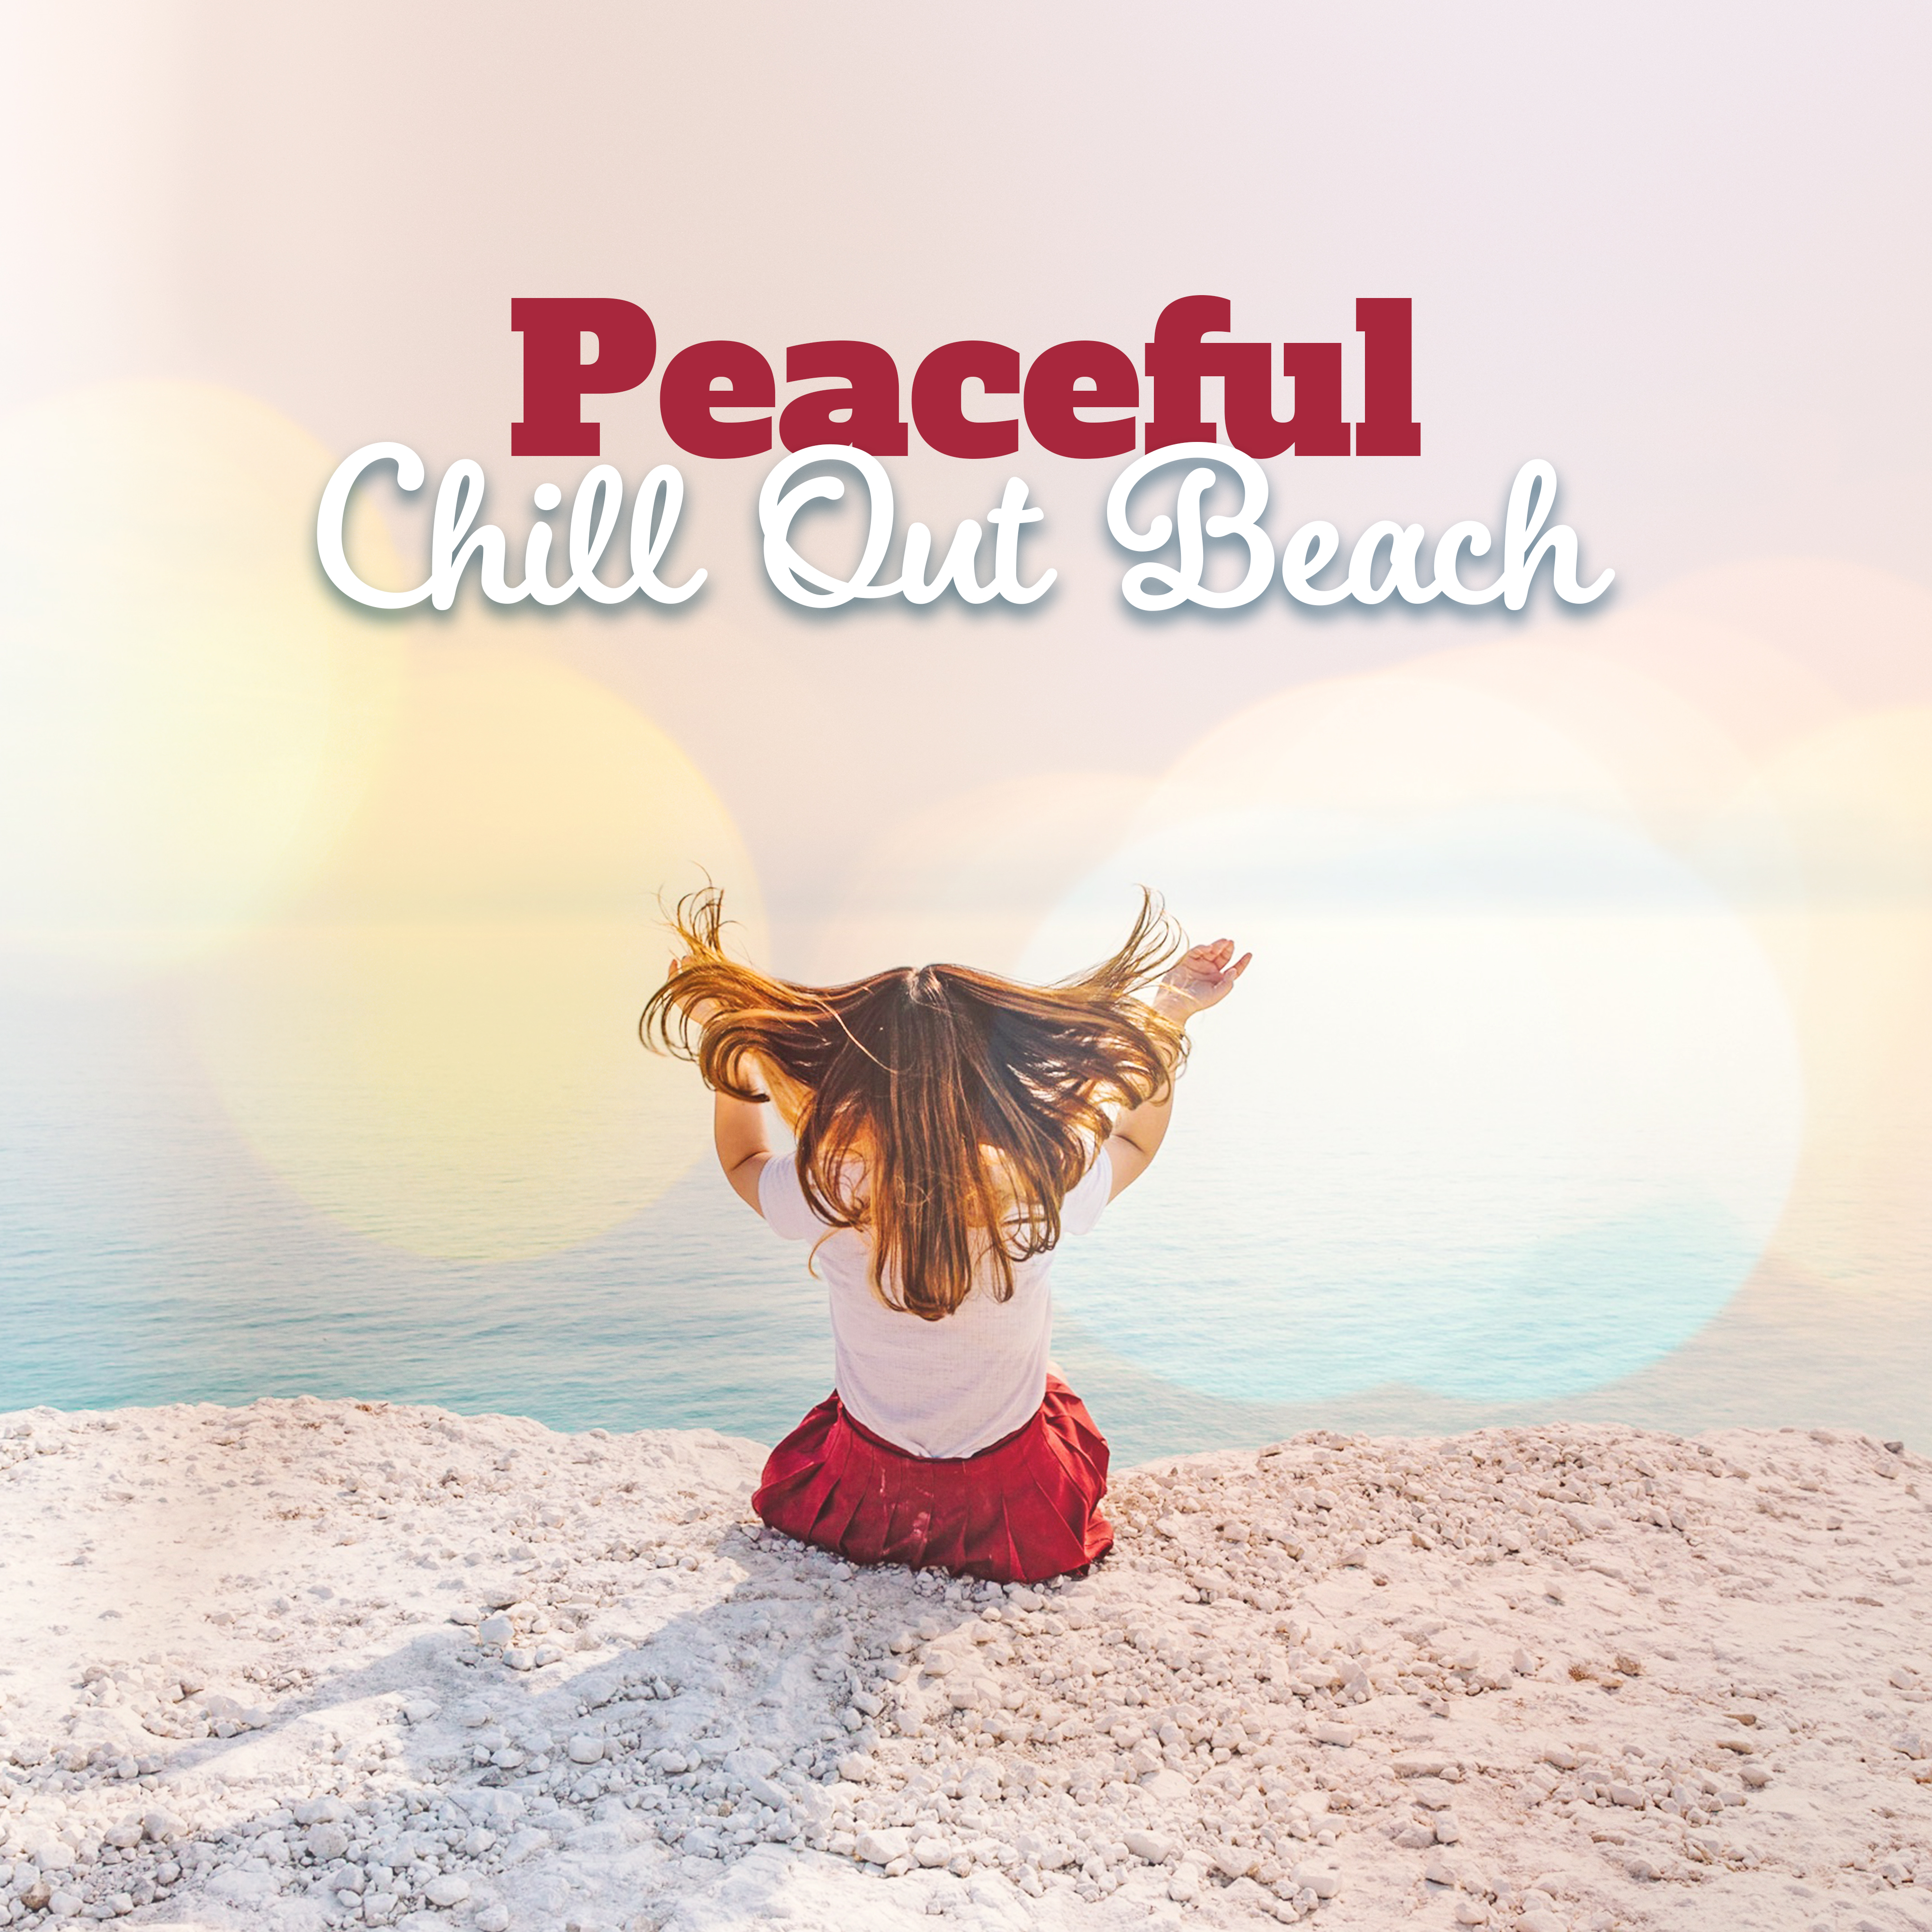 Peaceful Chill Out Beach – Summer 2017, Easy Listening, Miami Beach, Ibiza Rest, Calming Sounds